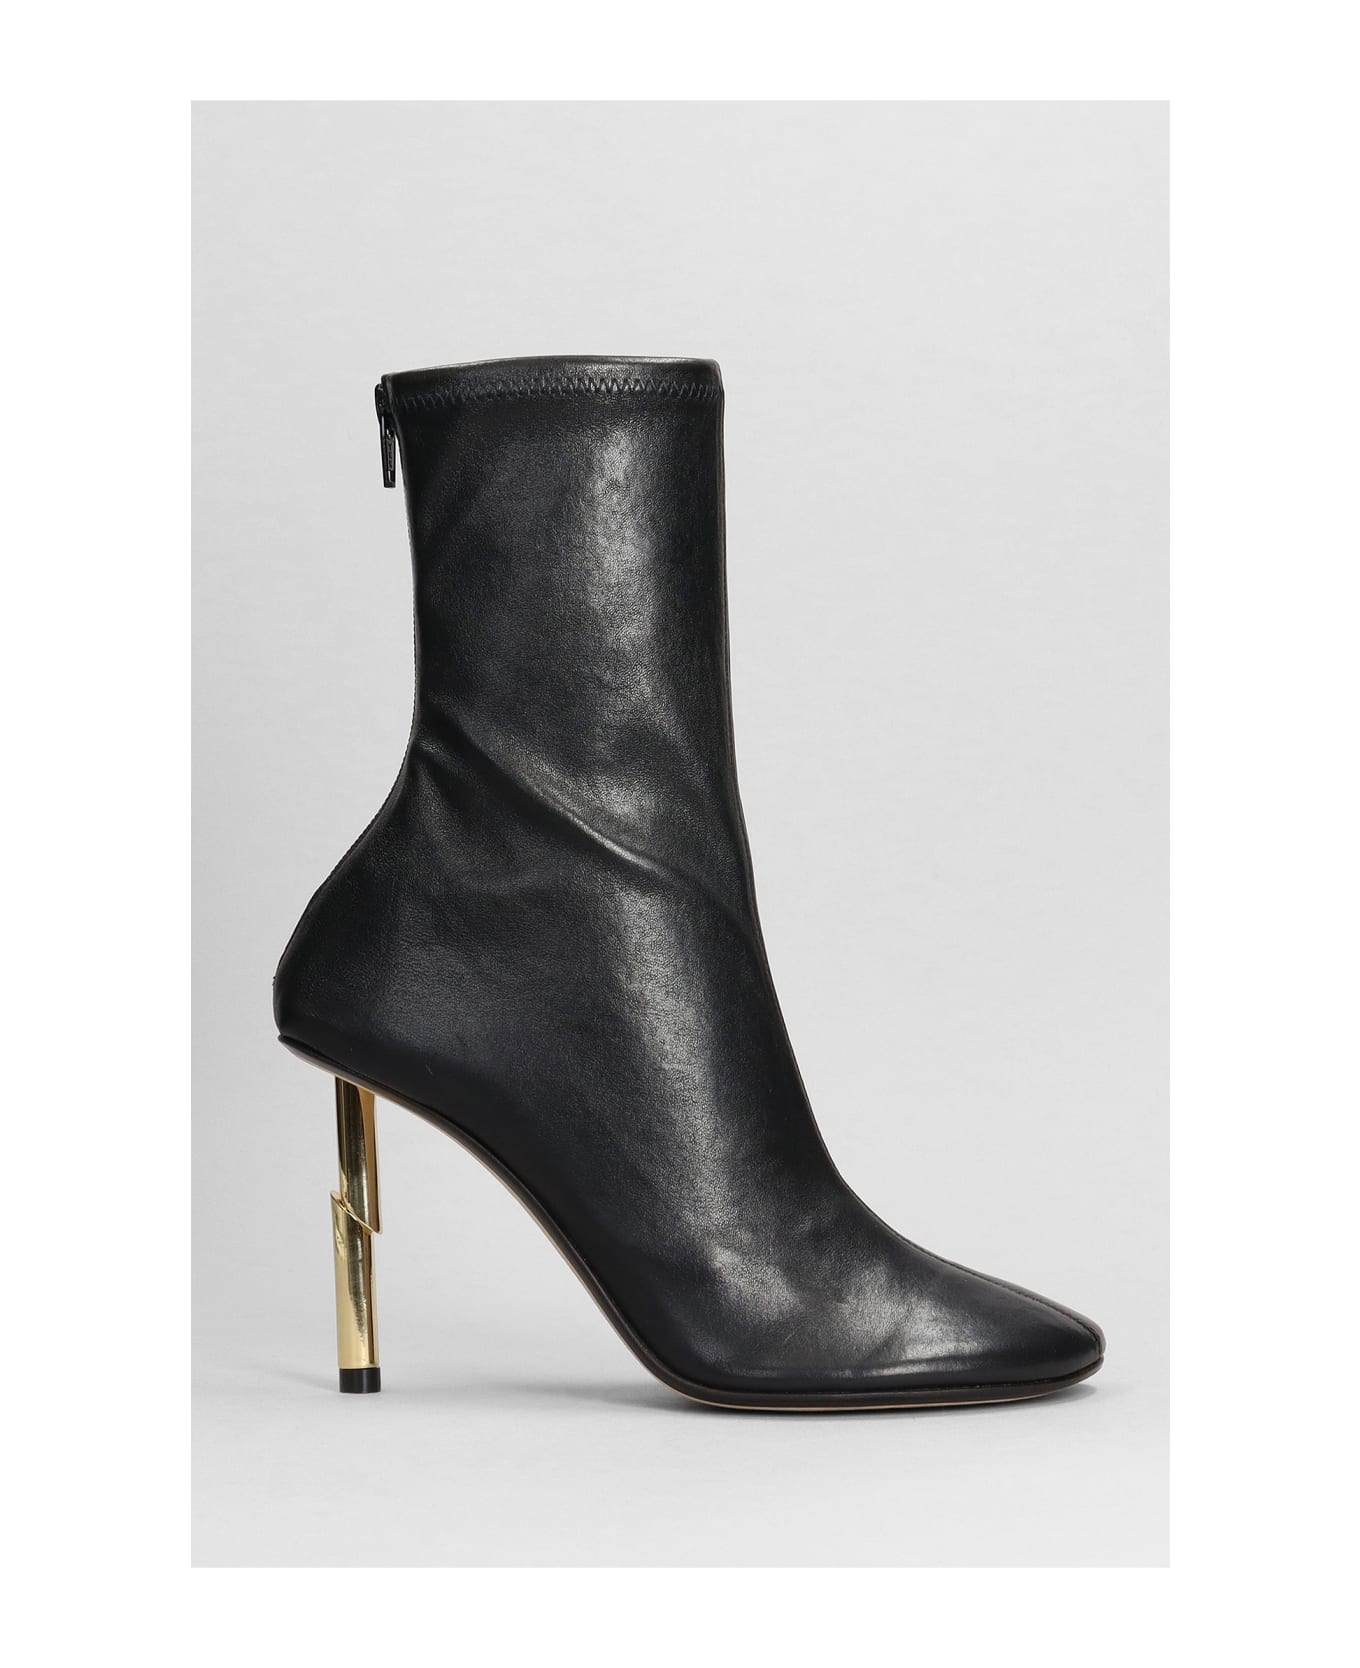 Lanvin High Heels Ankle Boots In Black Leather - black